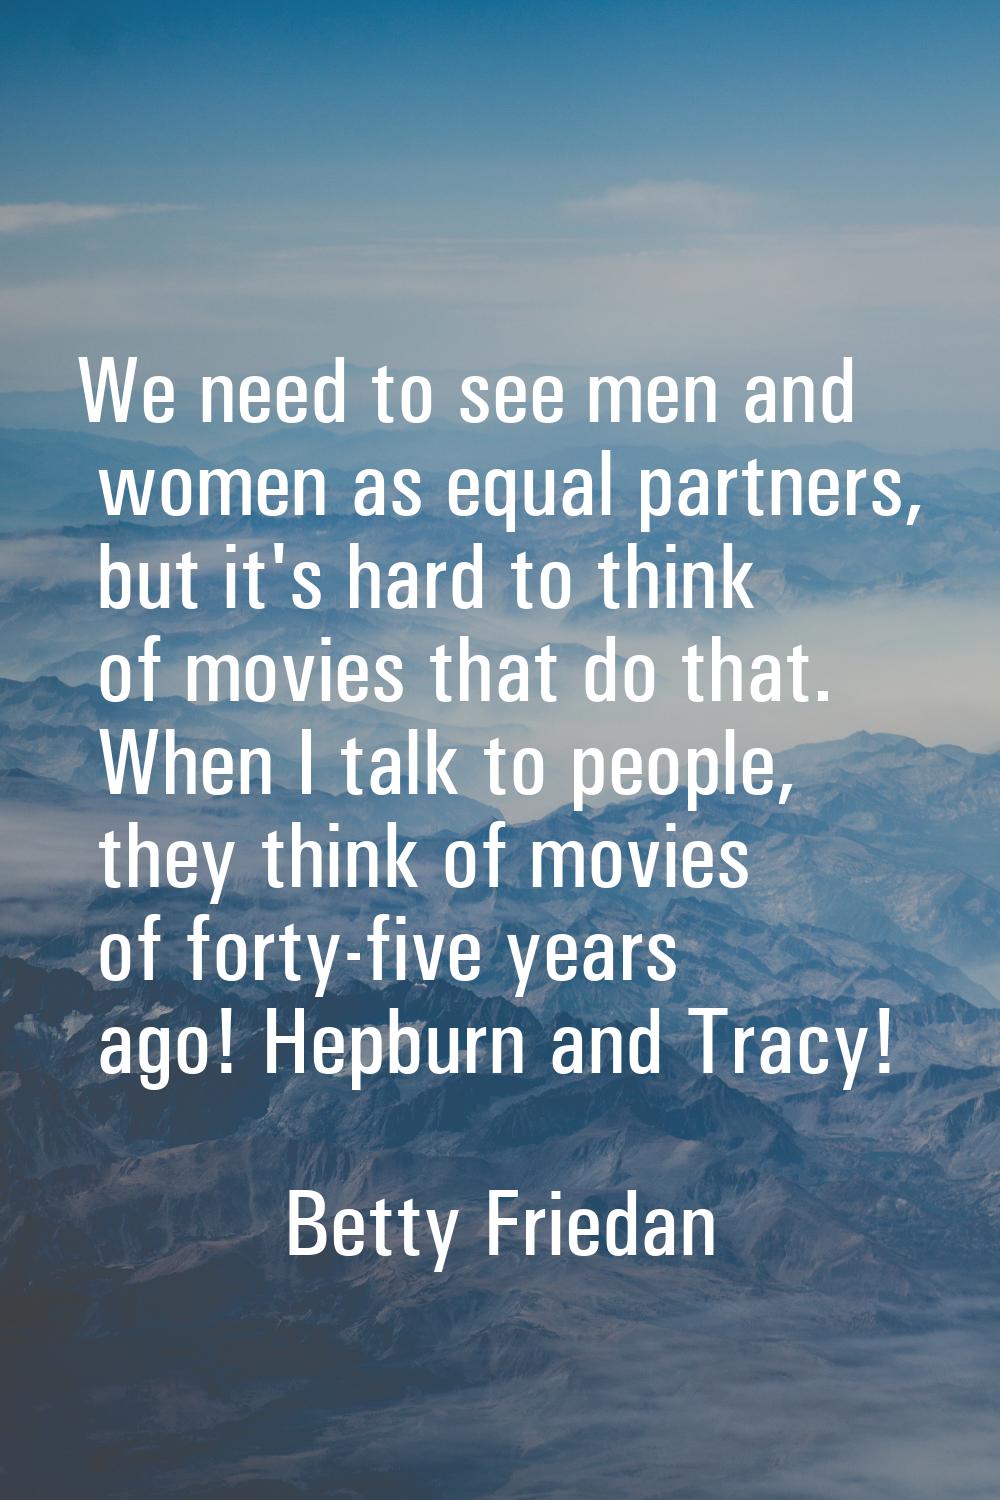 We need to see men and women as equal partners, but it's hard to think of movies that do that. When